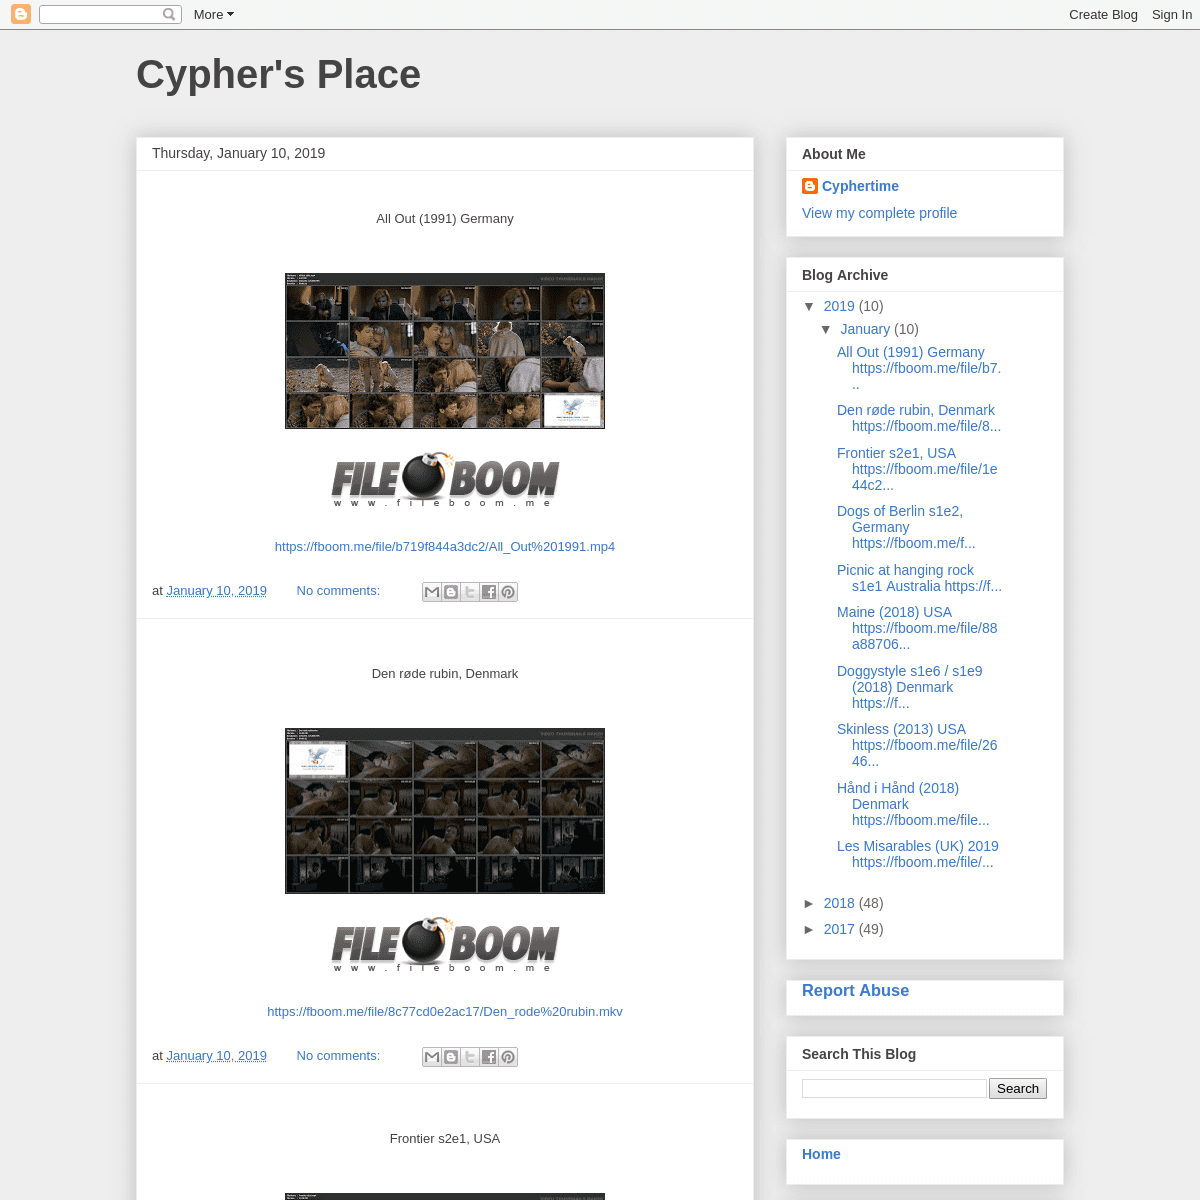 A complete backup of cyphertime.blogspot.com